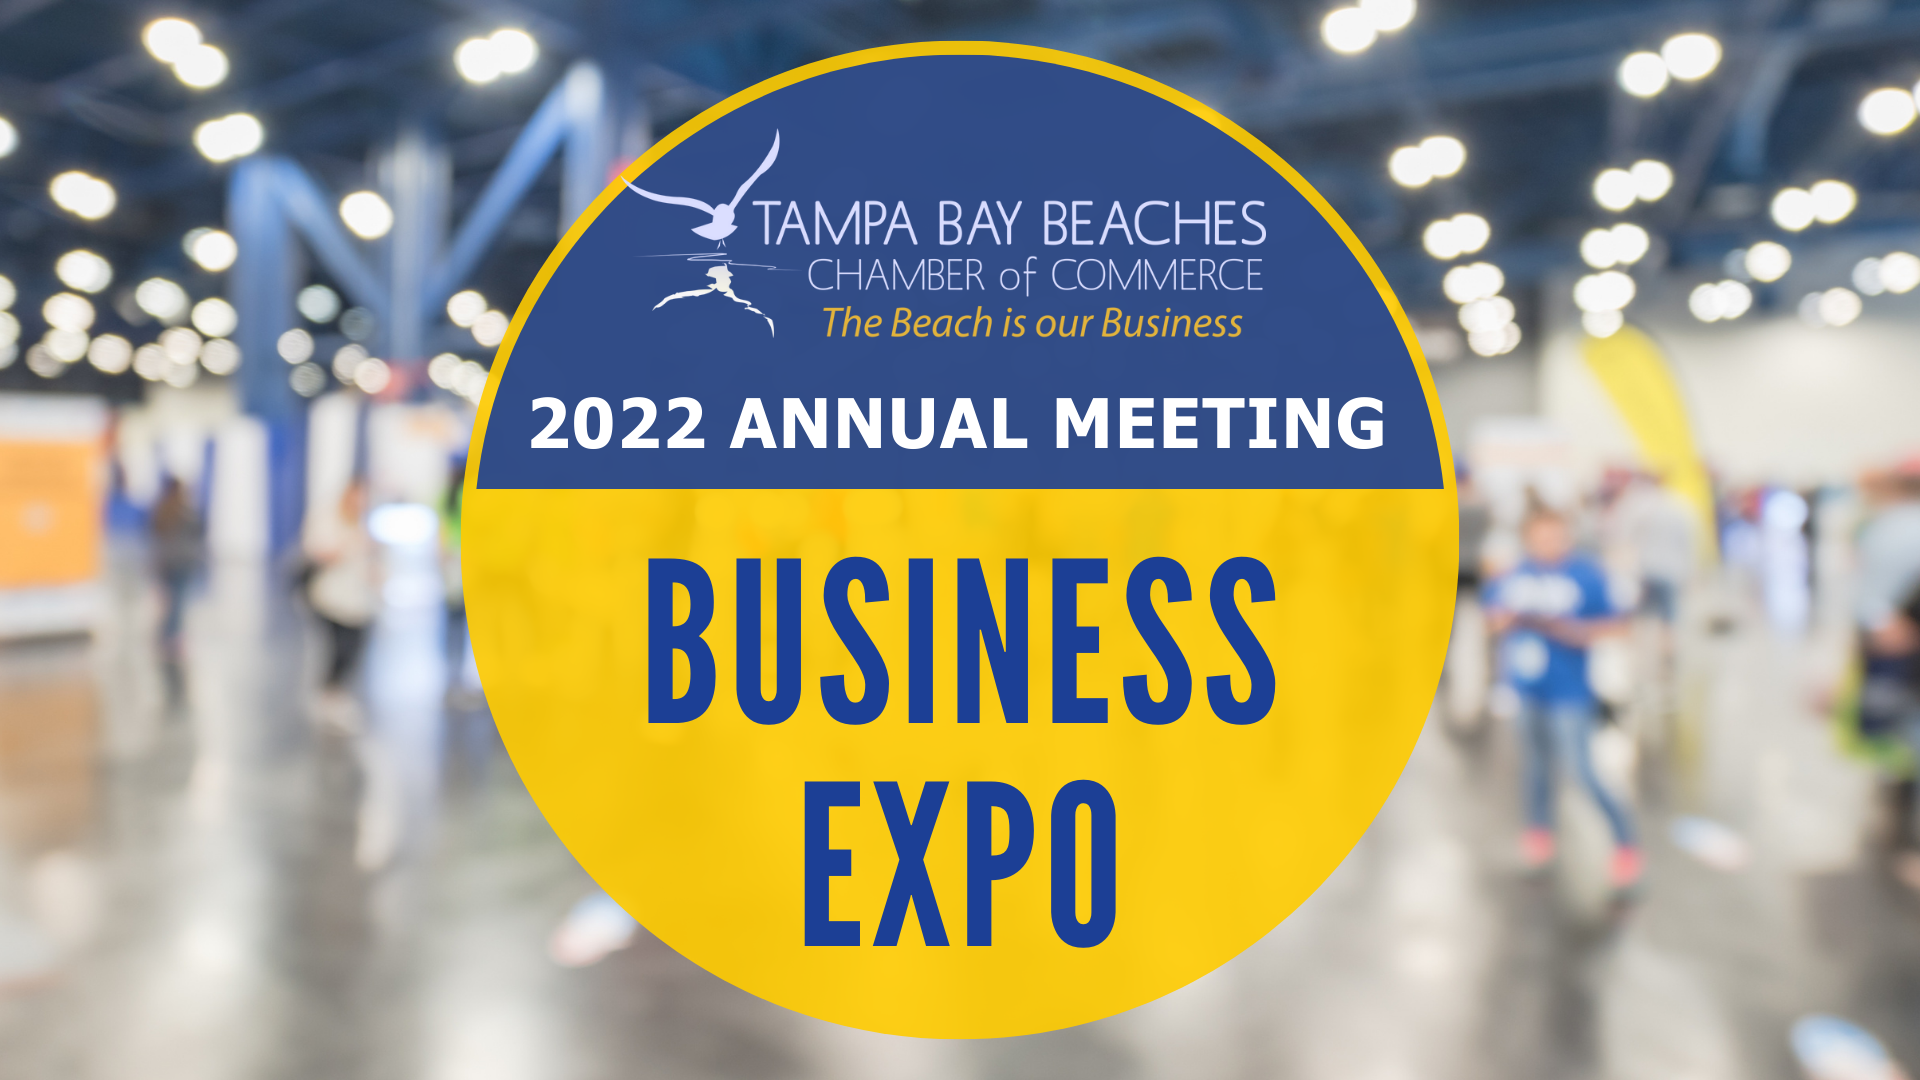 Feature Your Business at the Tampa Bay Beaches Chamber Annual Meeting